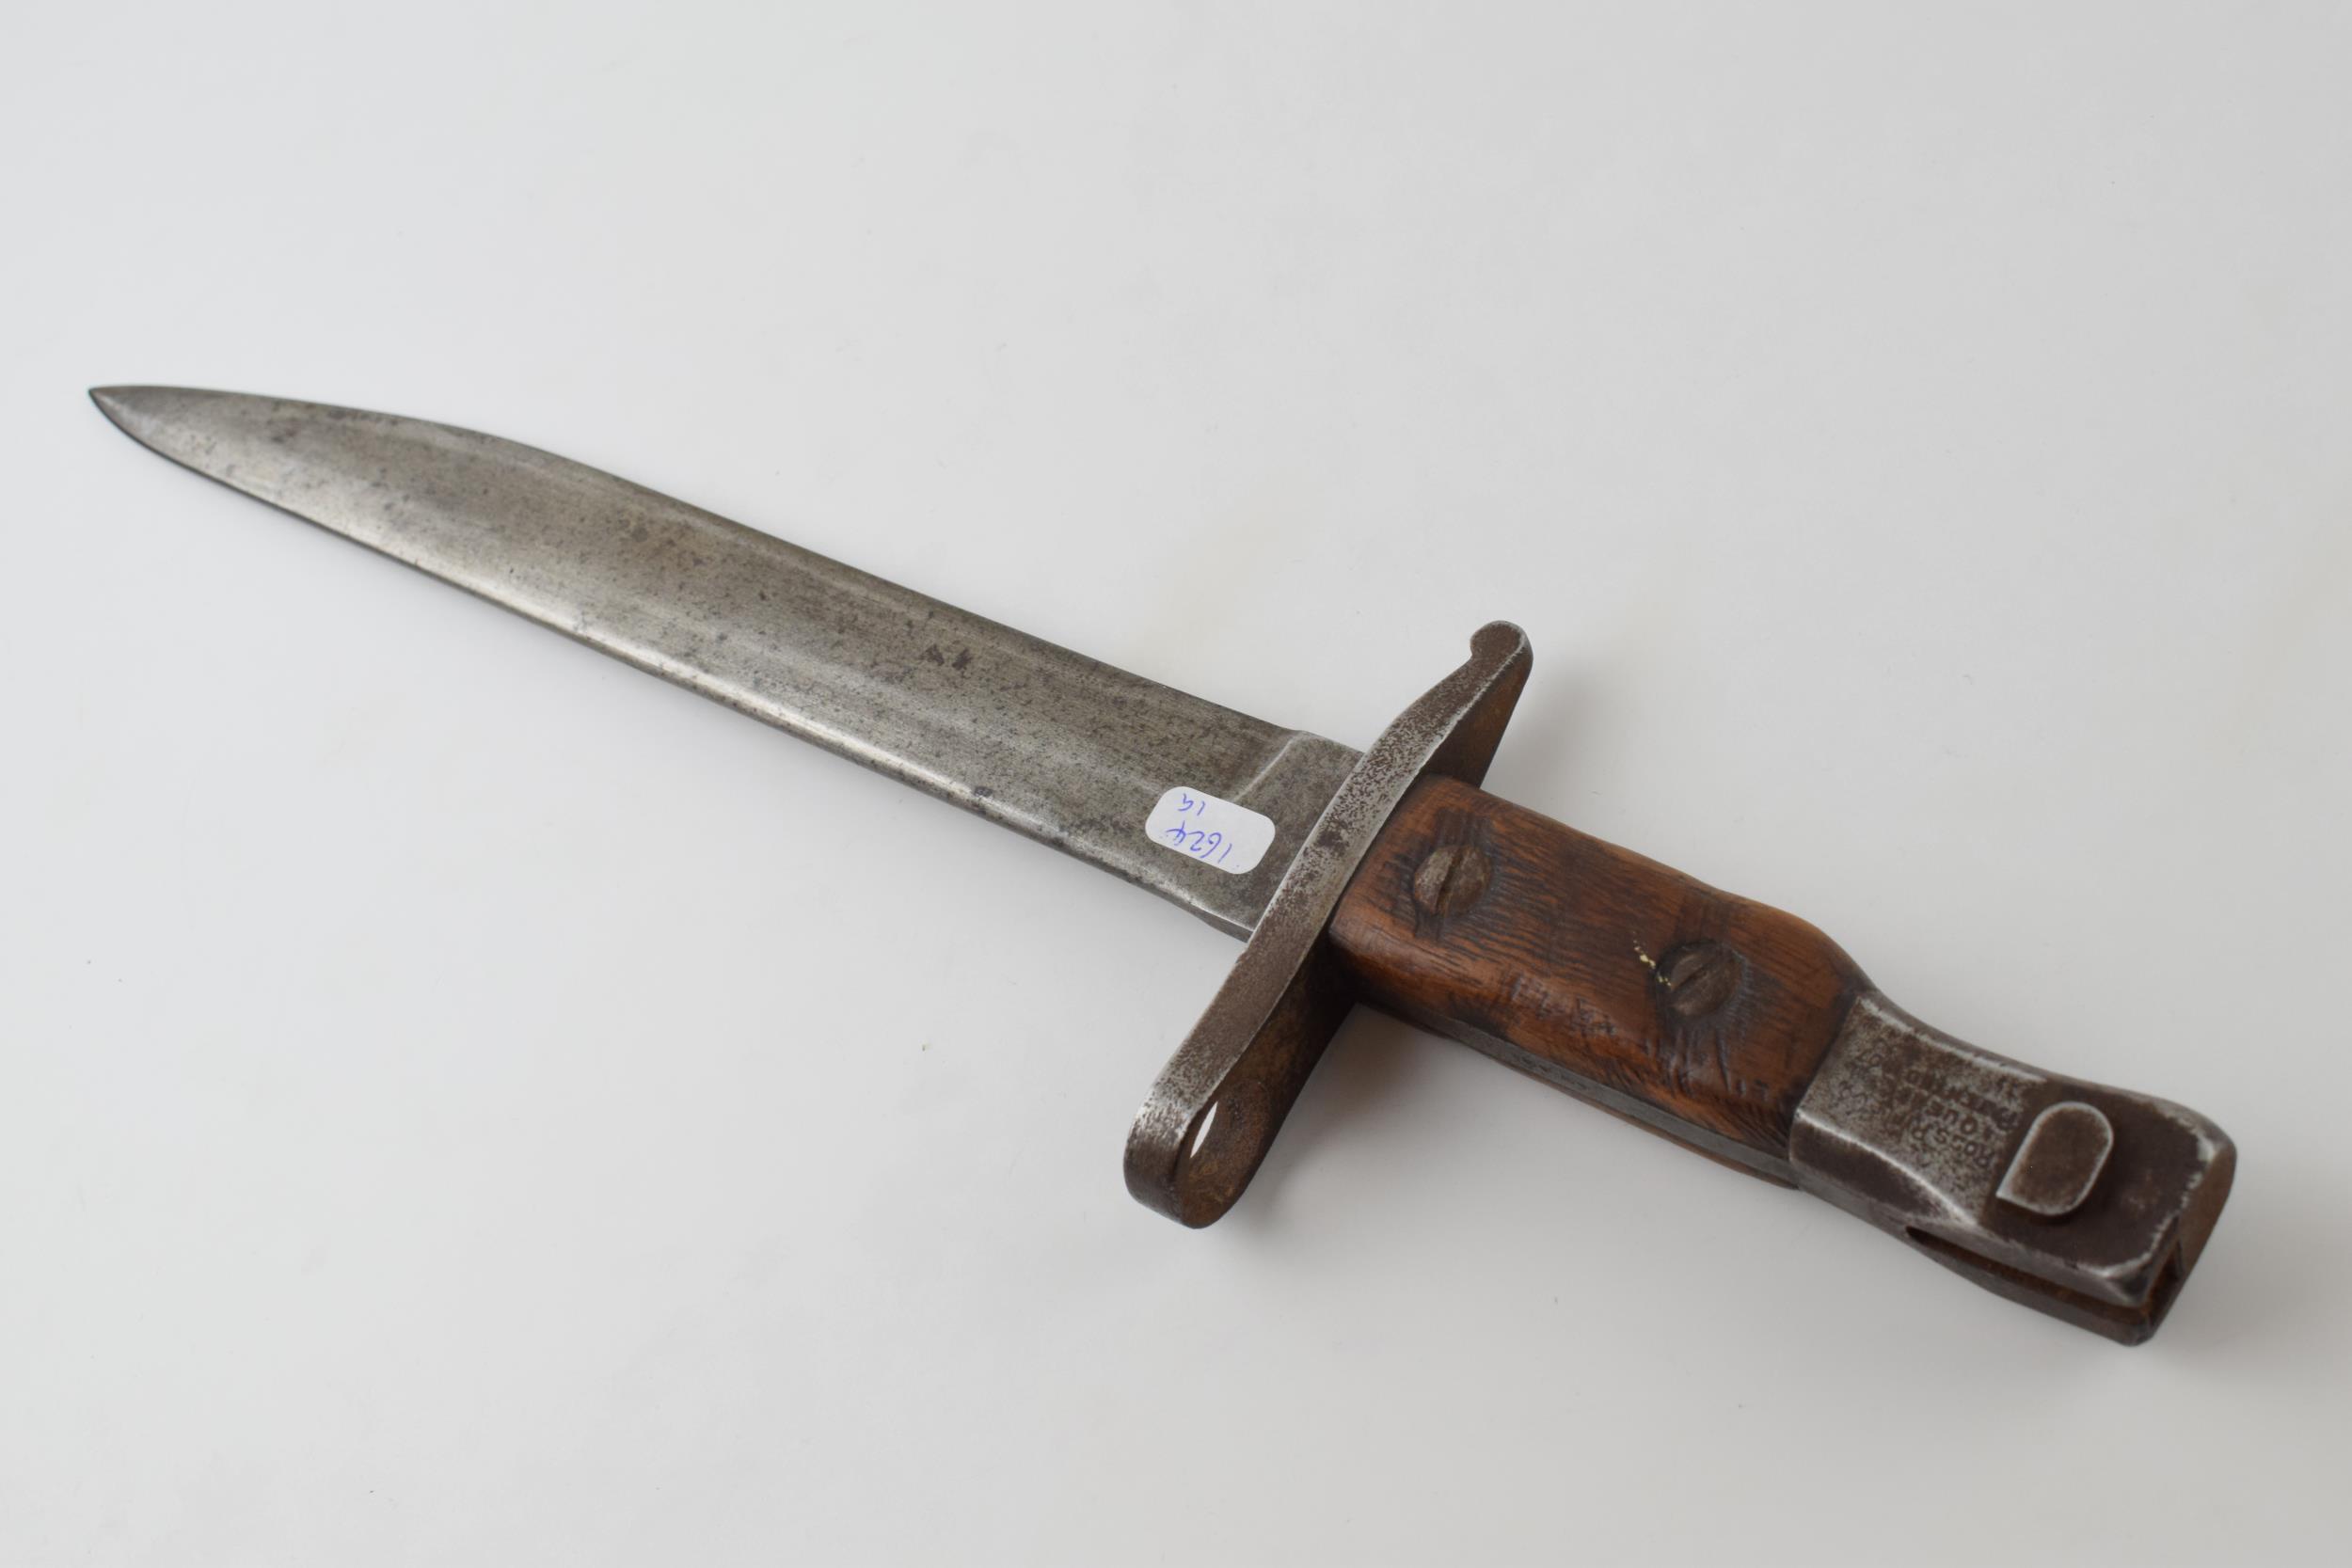 World War One bayonet by Ross Rifle Co, Quebec Canada, 1907 patent, 37cm long. - Image 6 of 6